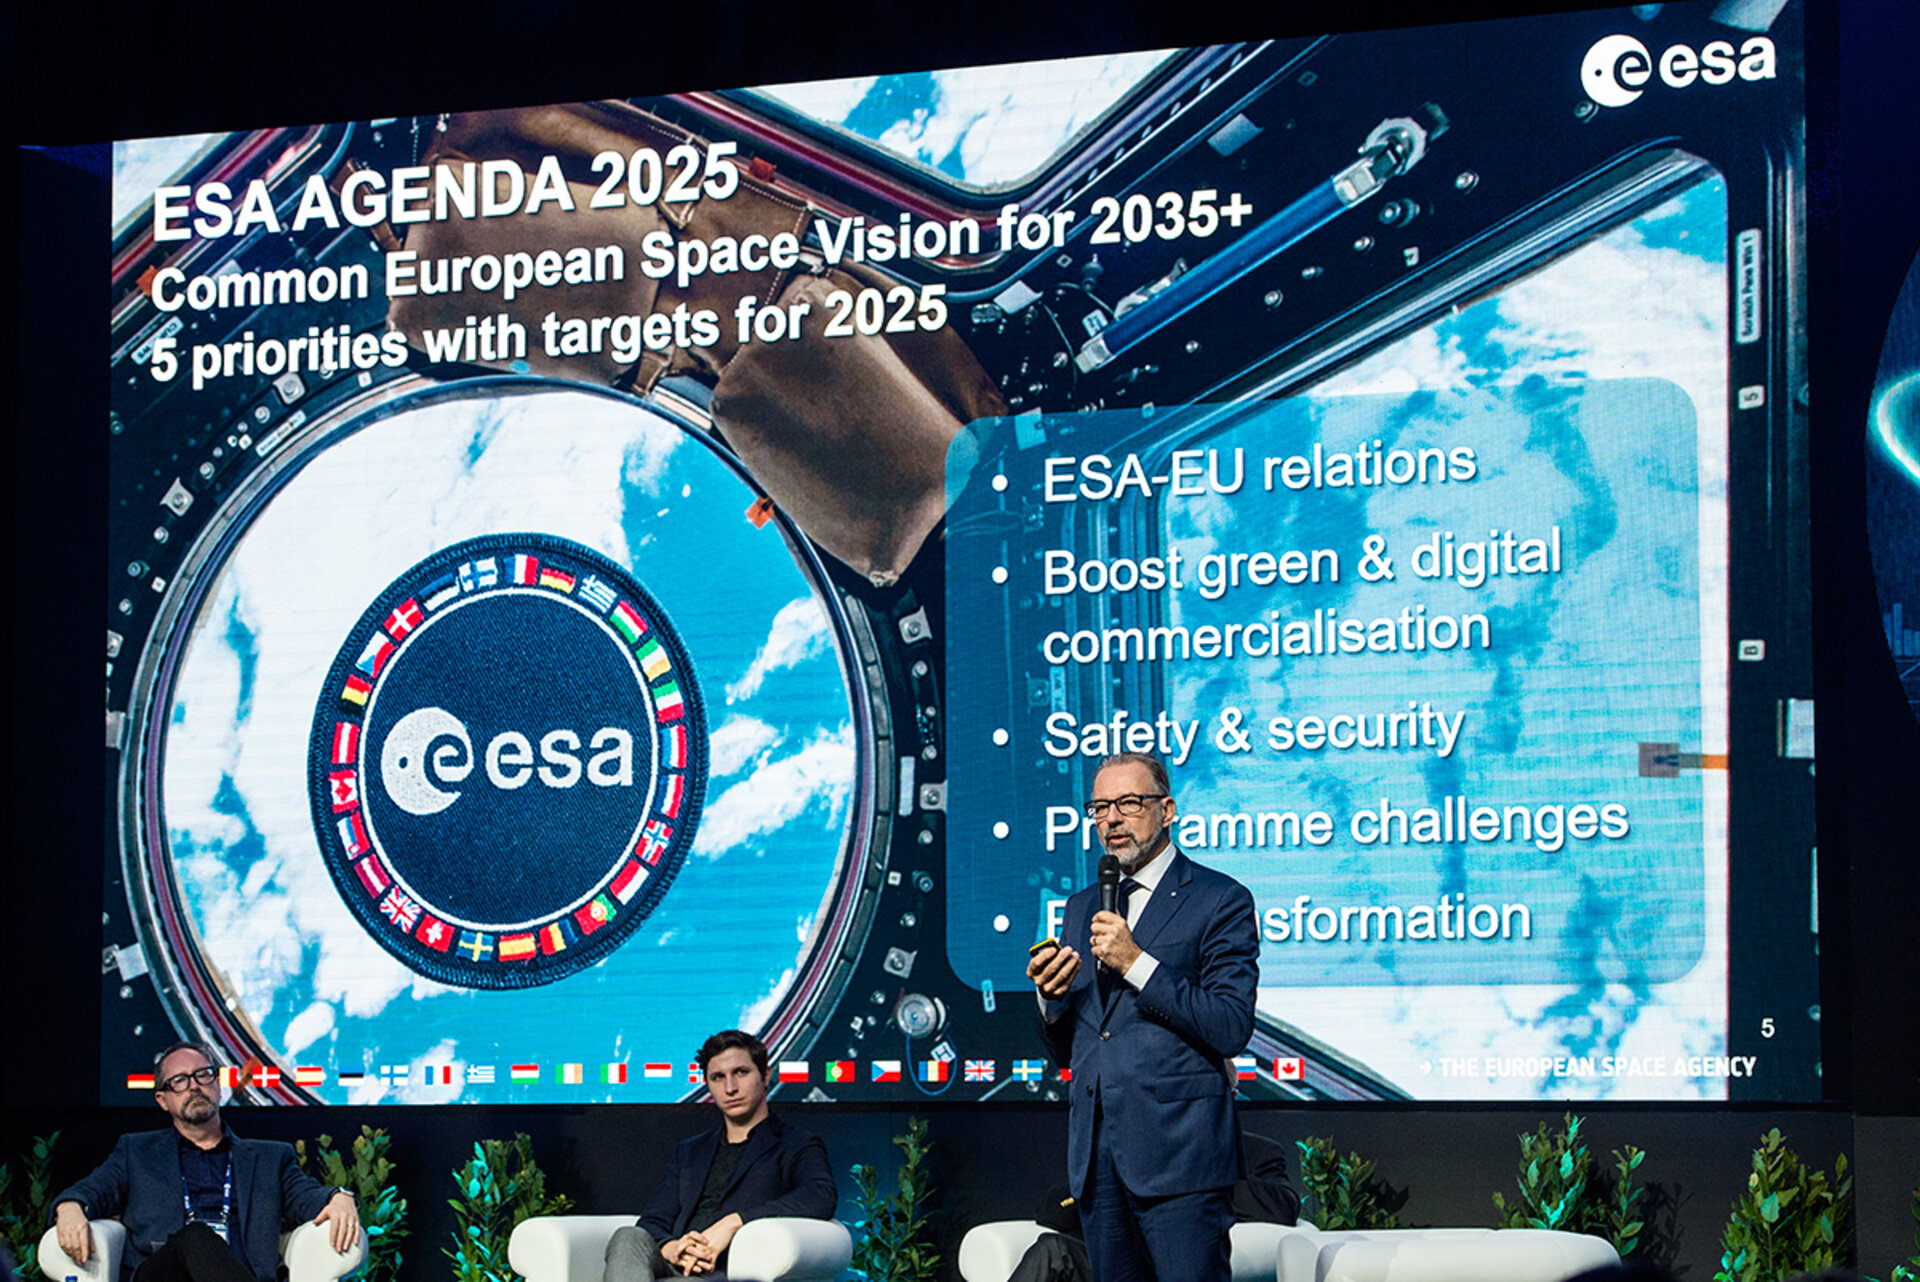 ESA Director General speaking at the Φ-week opening session